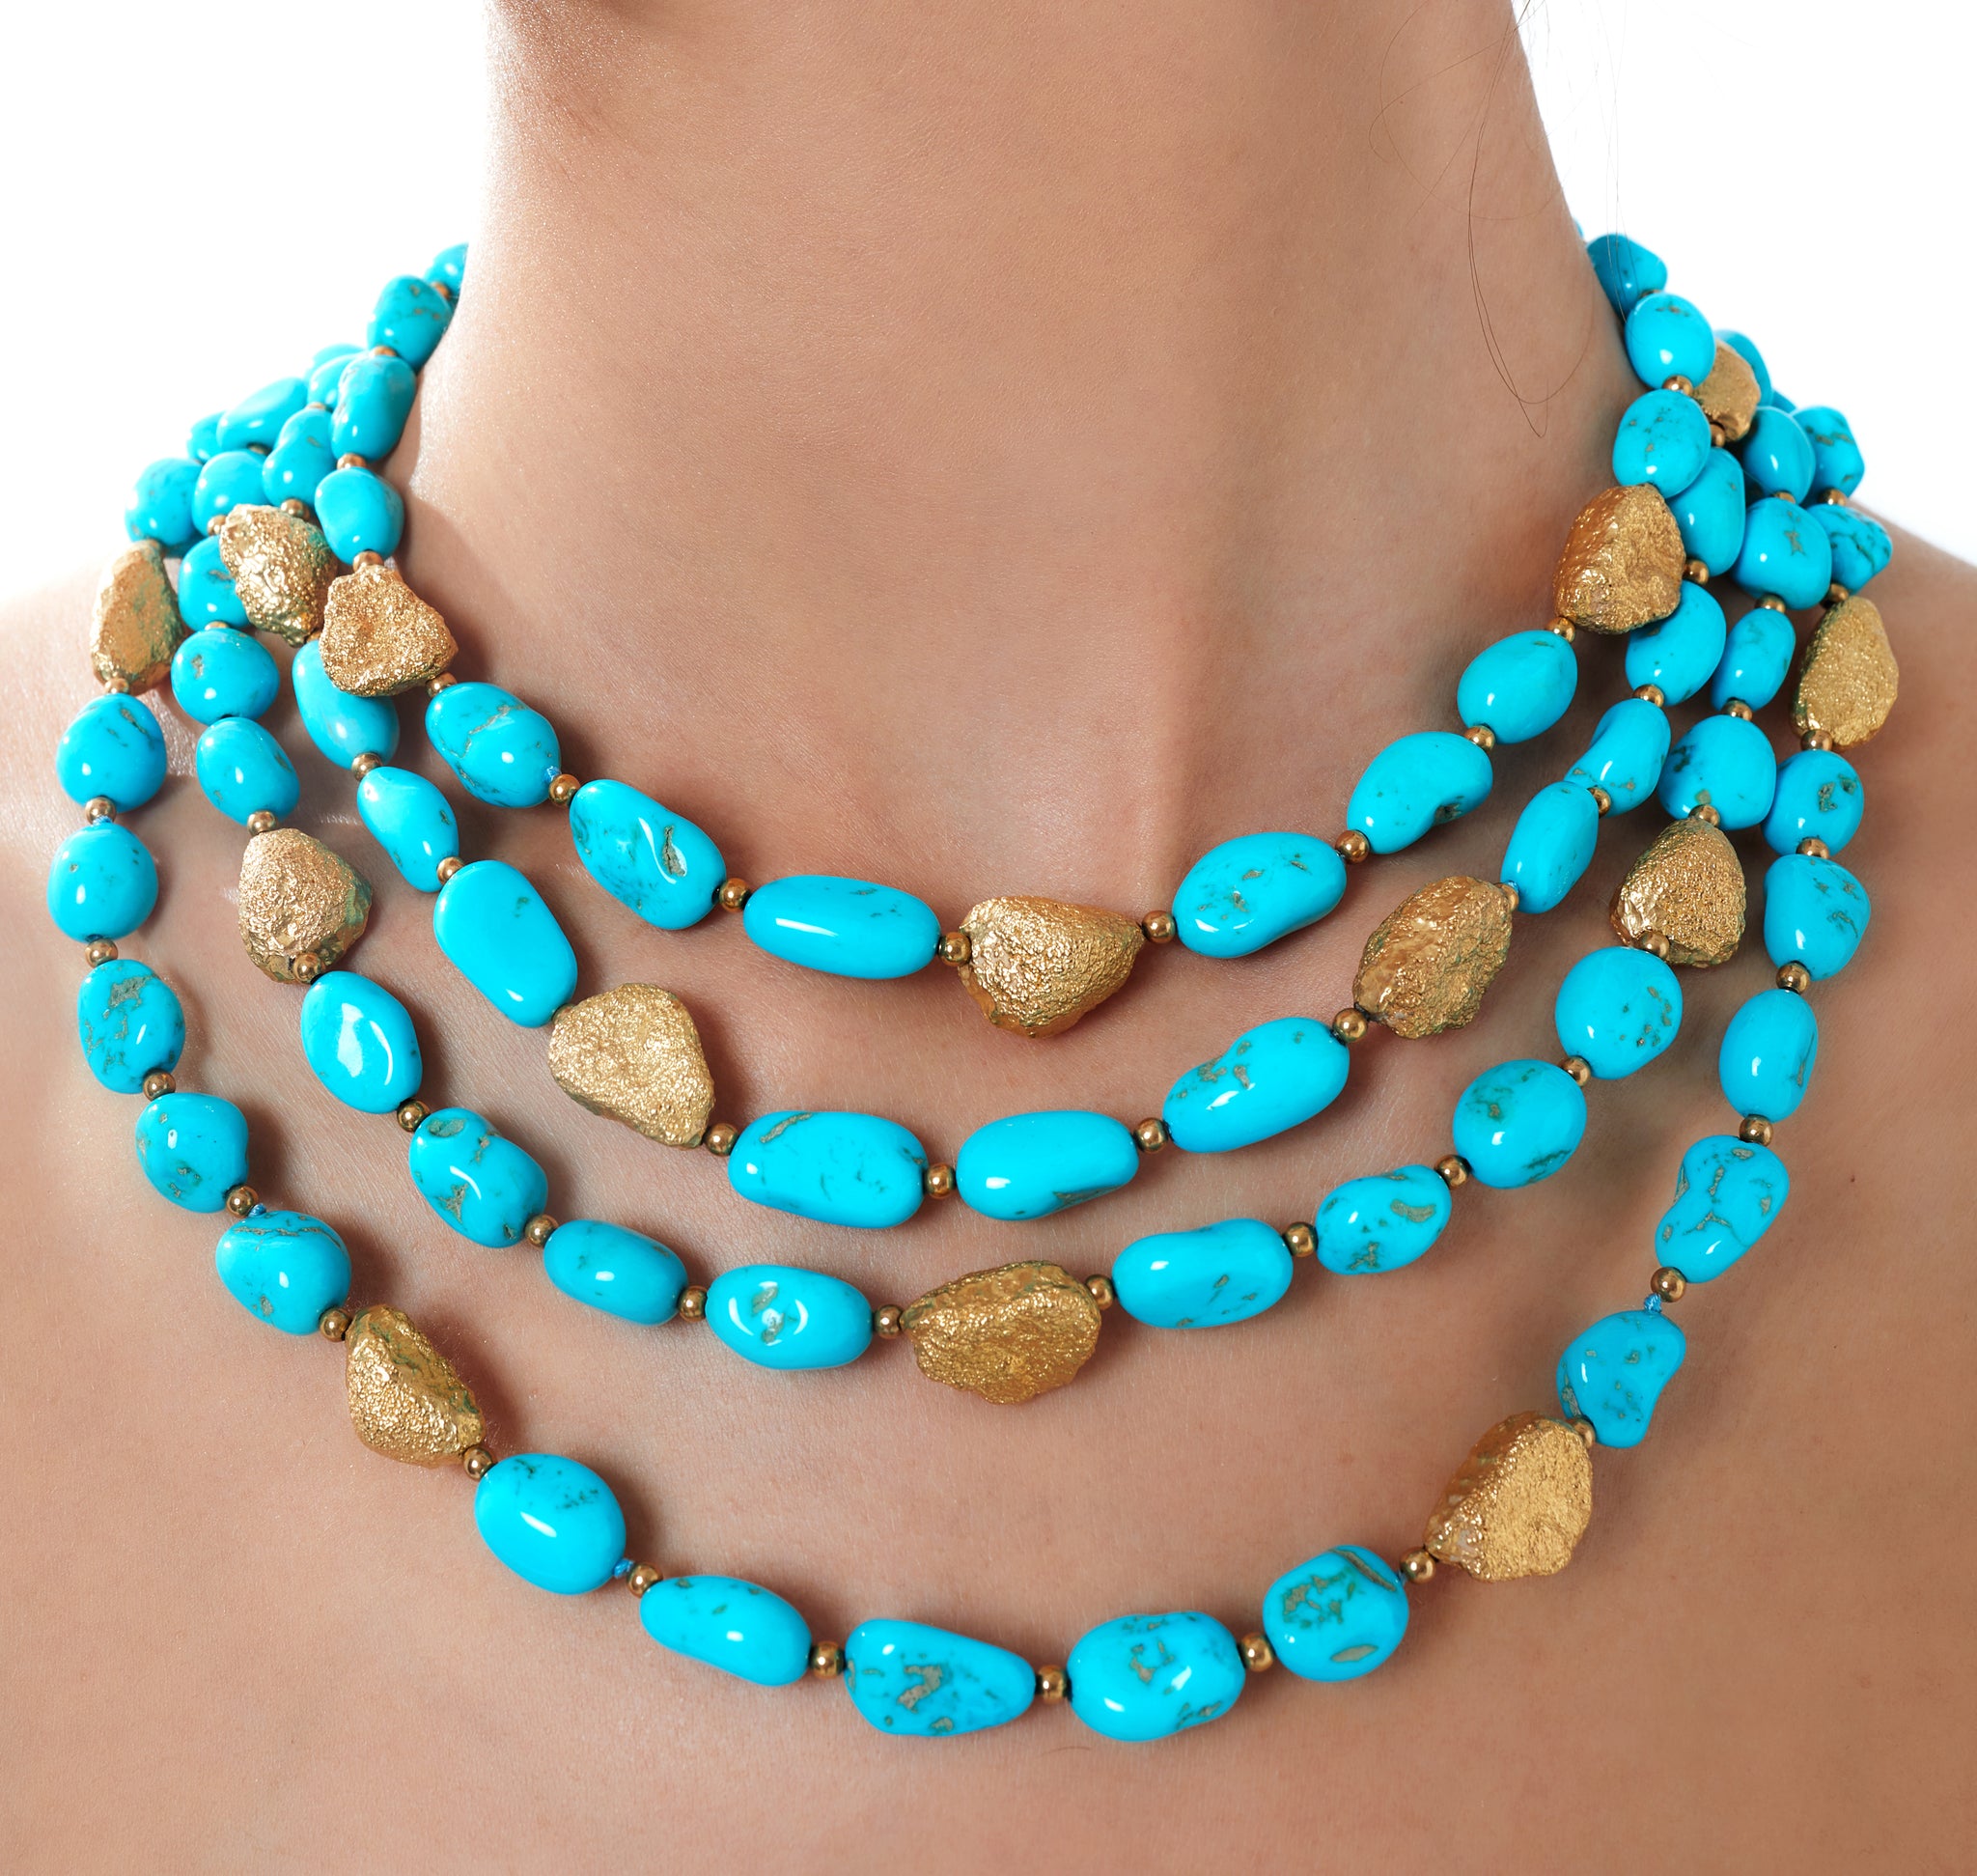 Rough Turquoise Necklace